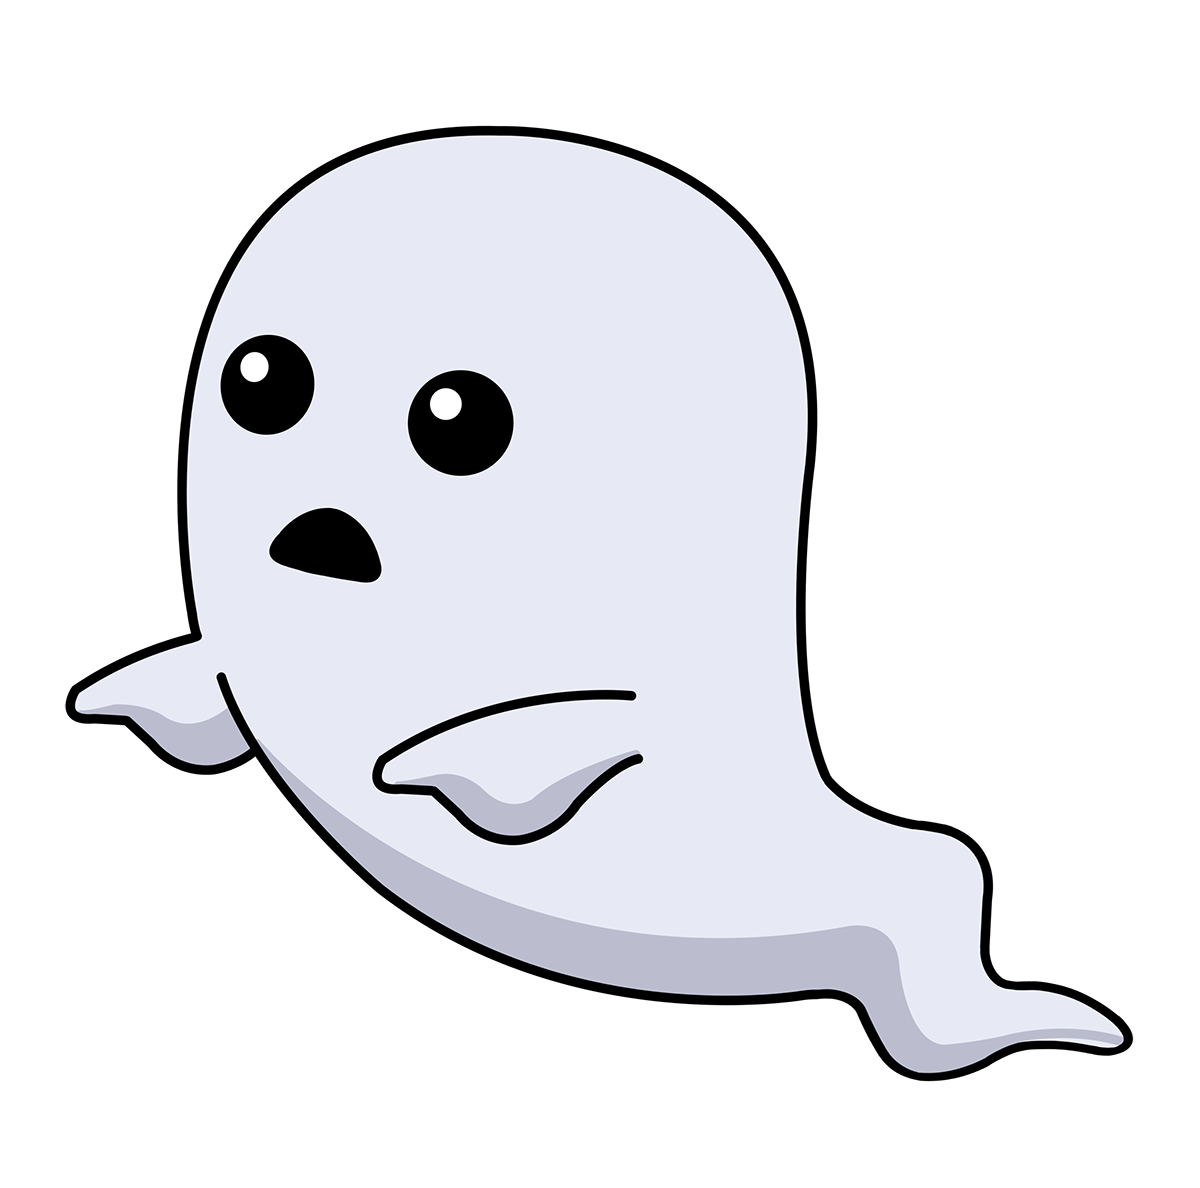 Free to Use & Public Domain Ghost Clip Art